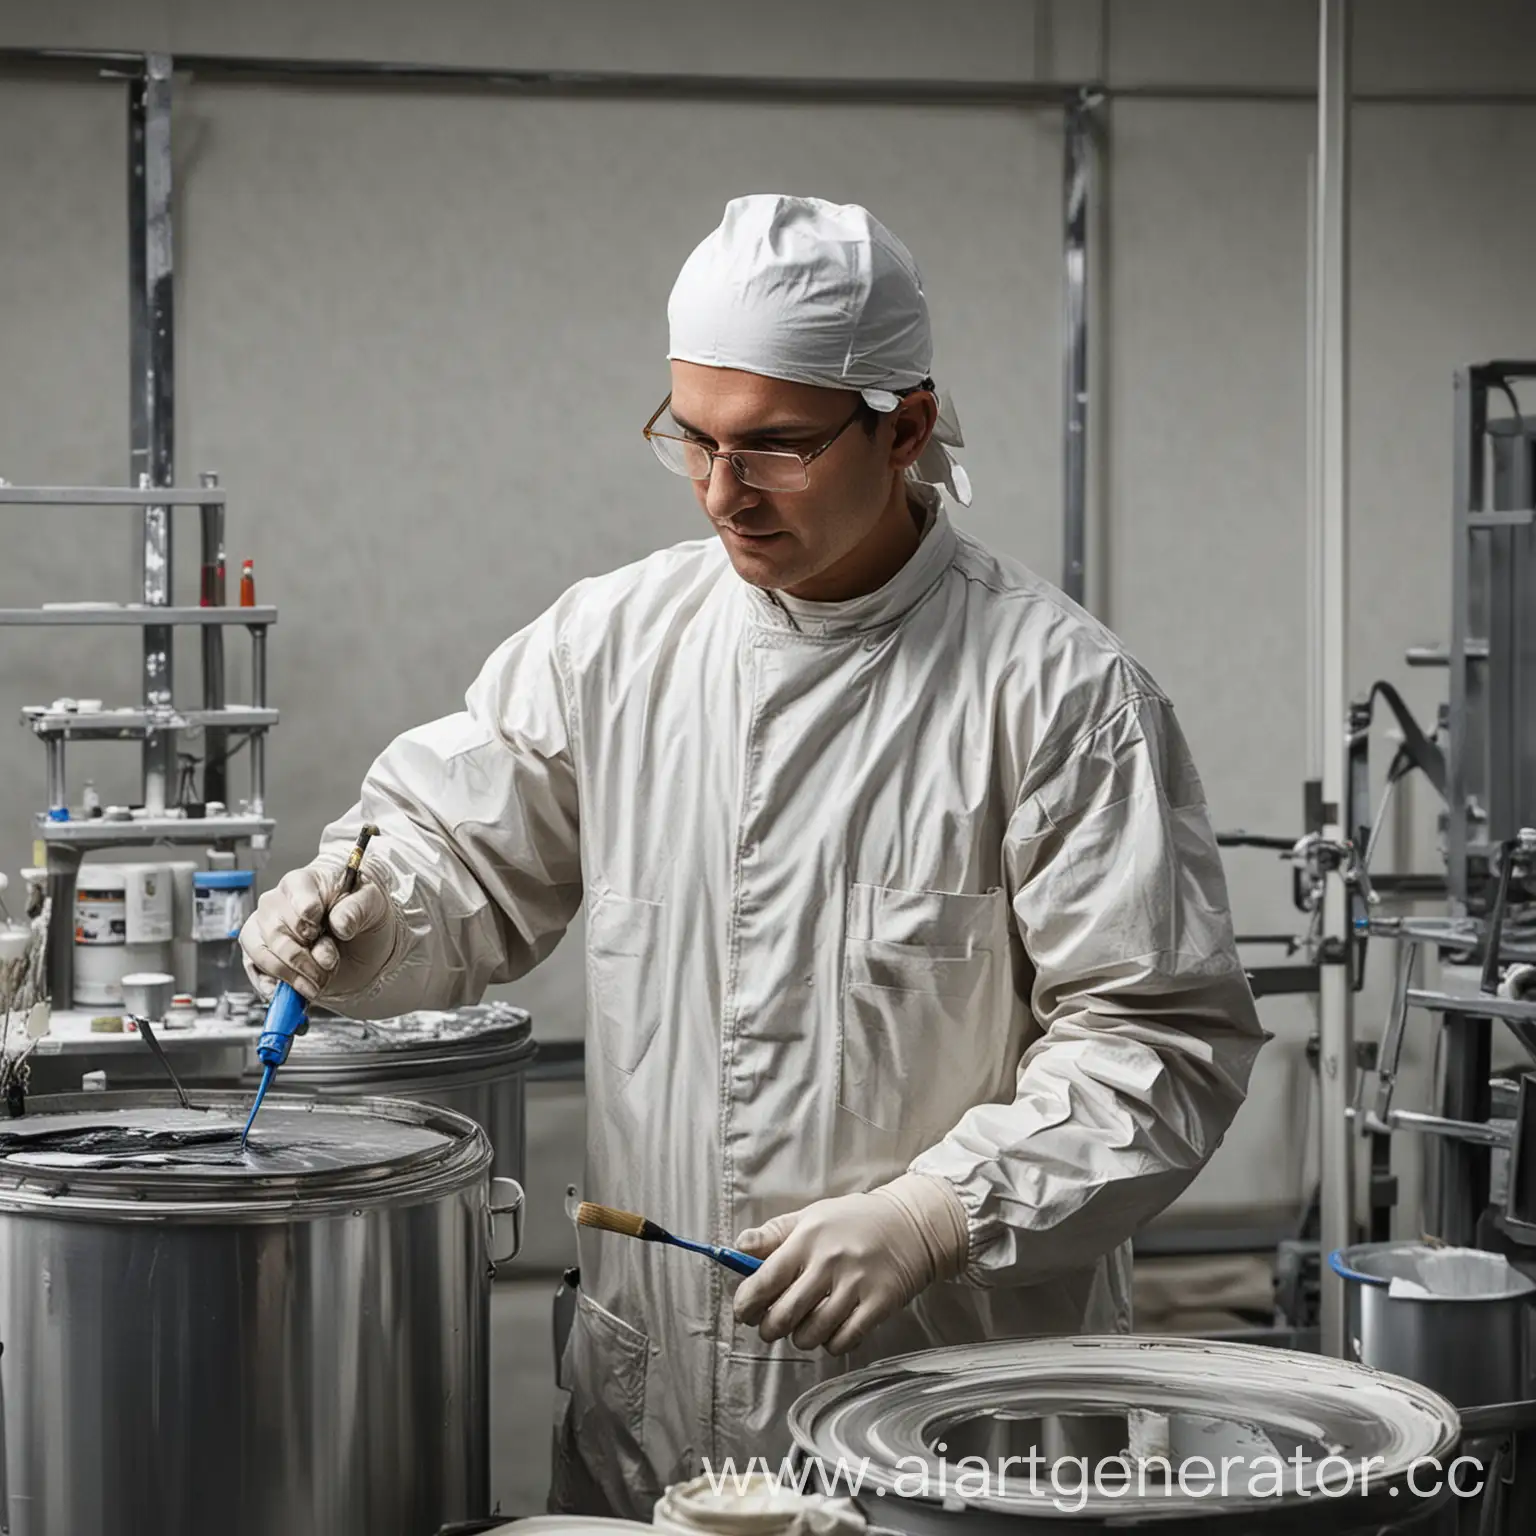 Modern paint production involves advanced technology and precise formulations to create high-quality products.